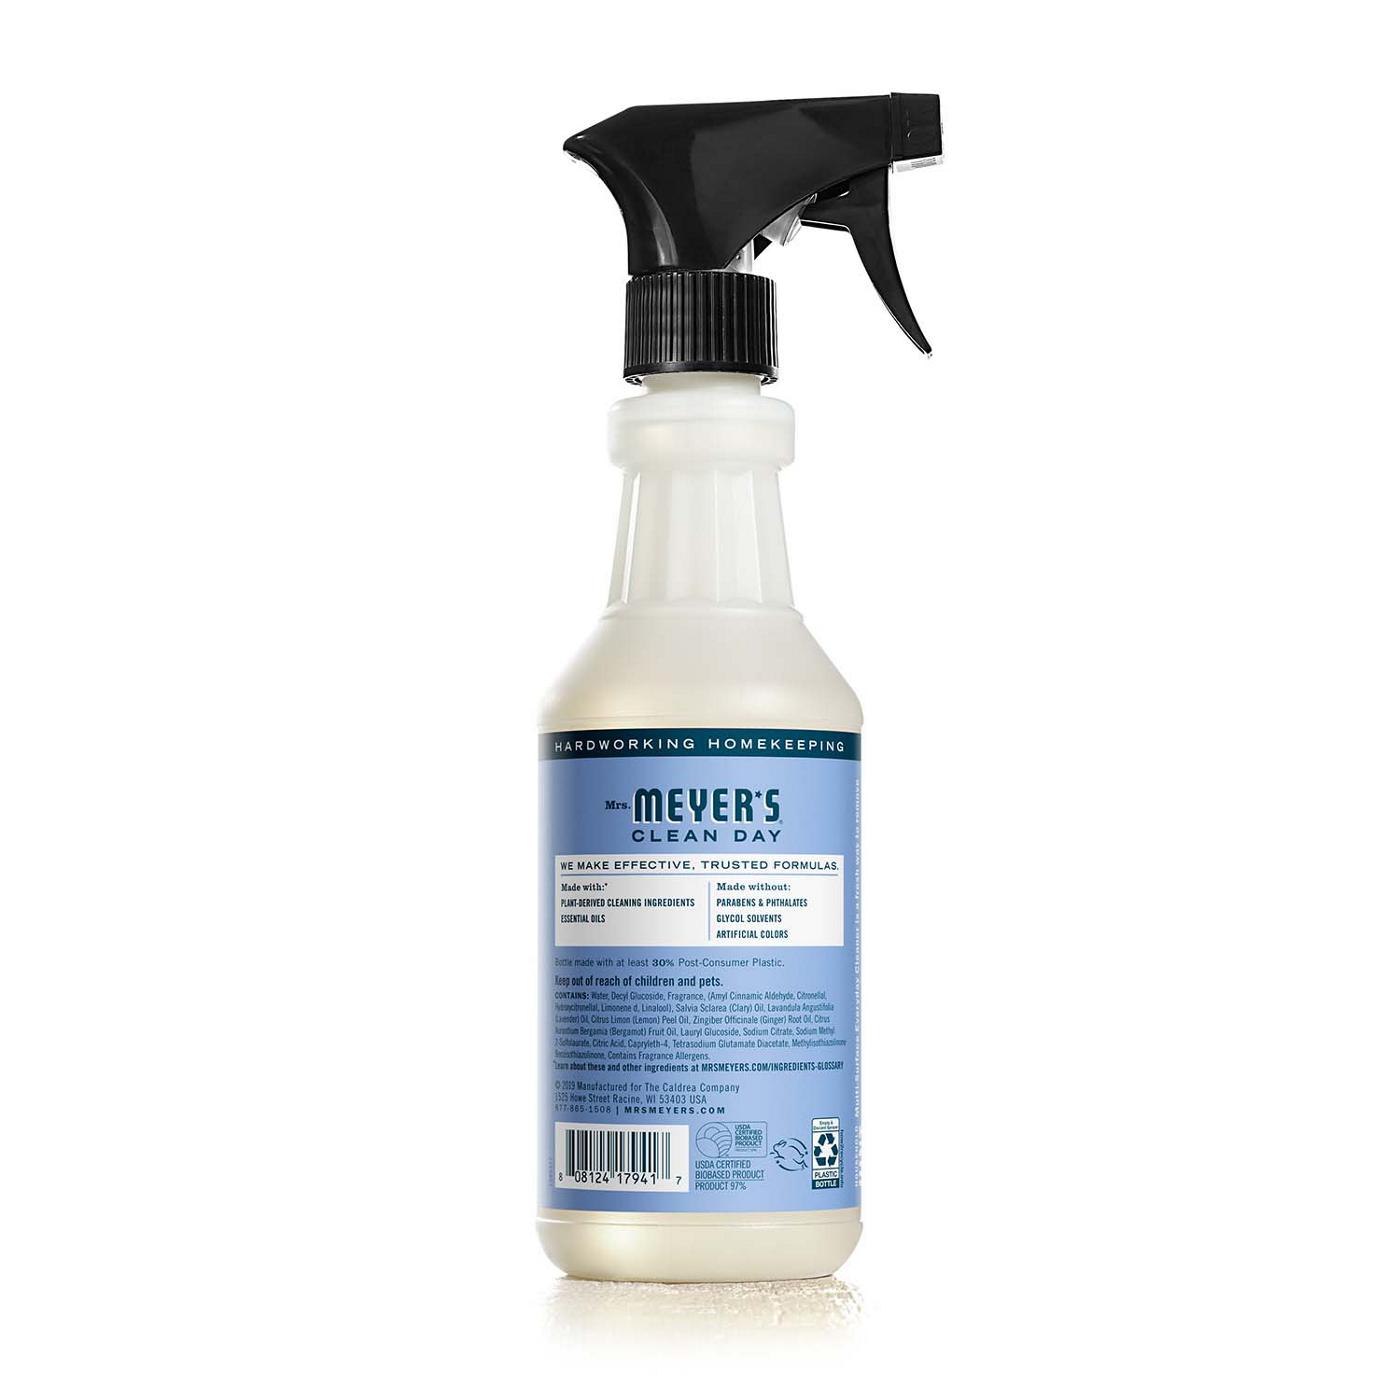 Mrs. Meyer's Clean Day Bluebell Scent Multi-Surface Everyday Cleaner Spray; image 5 of 6